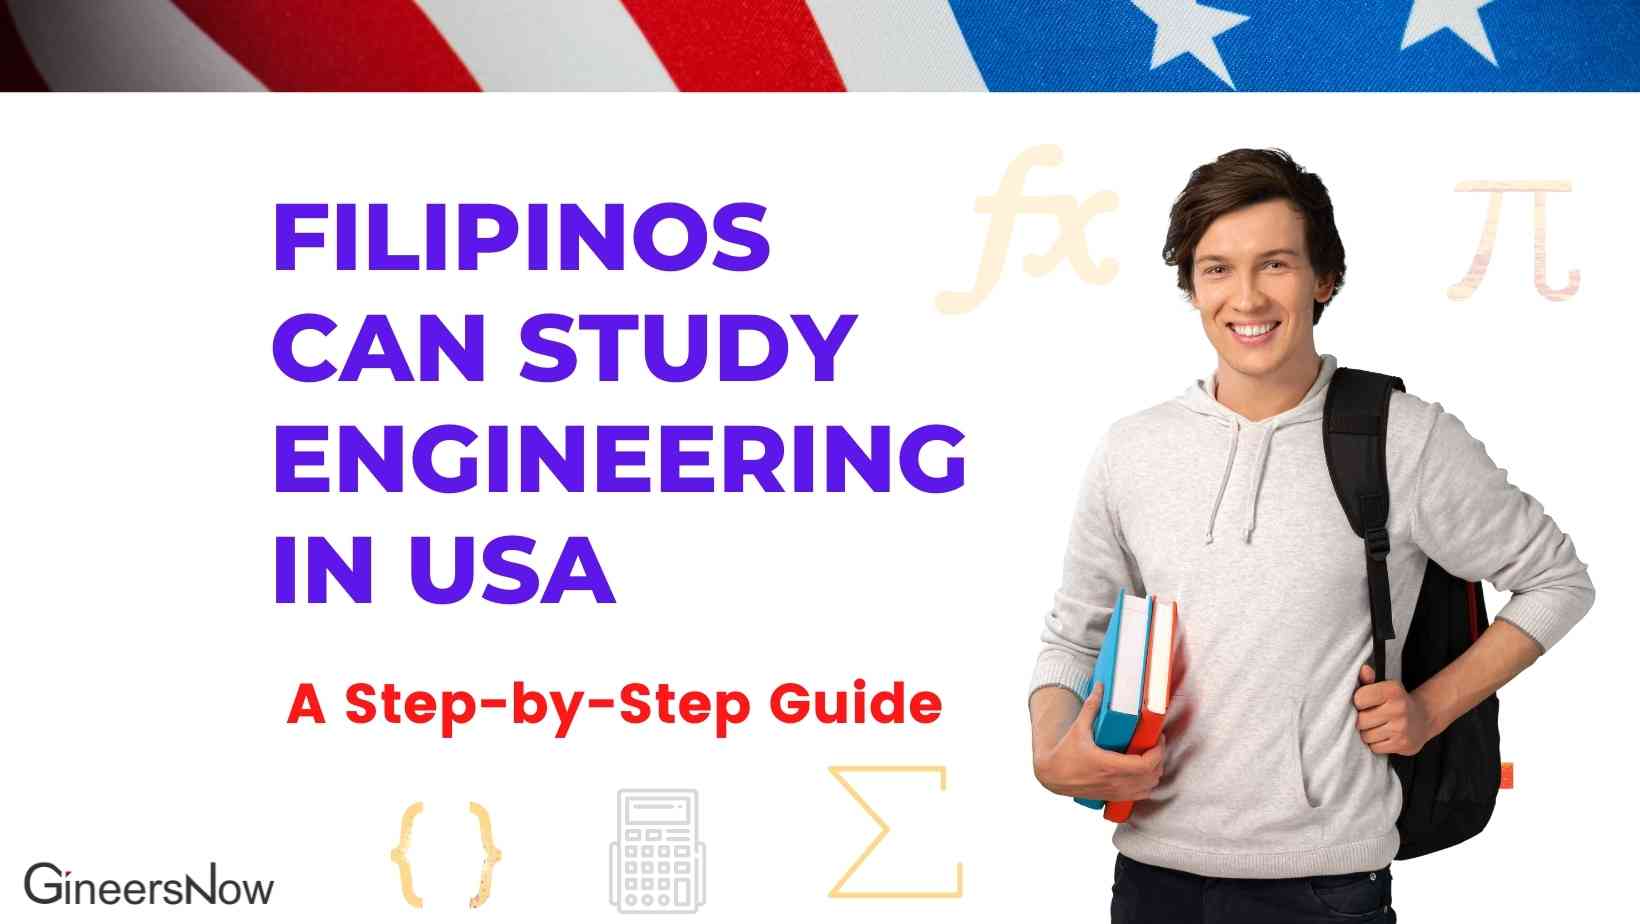 How Can Filipino Engineering Students Study in USA?